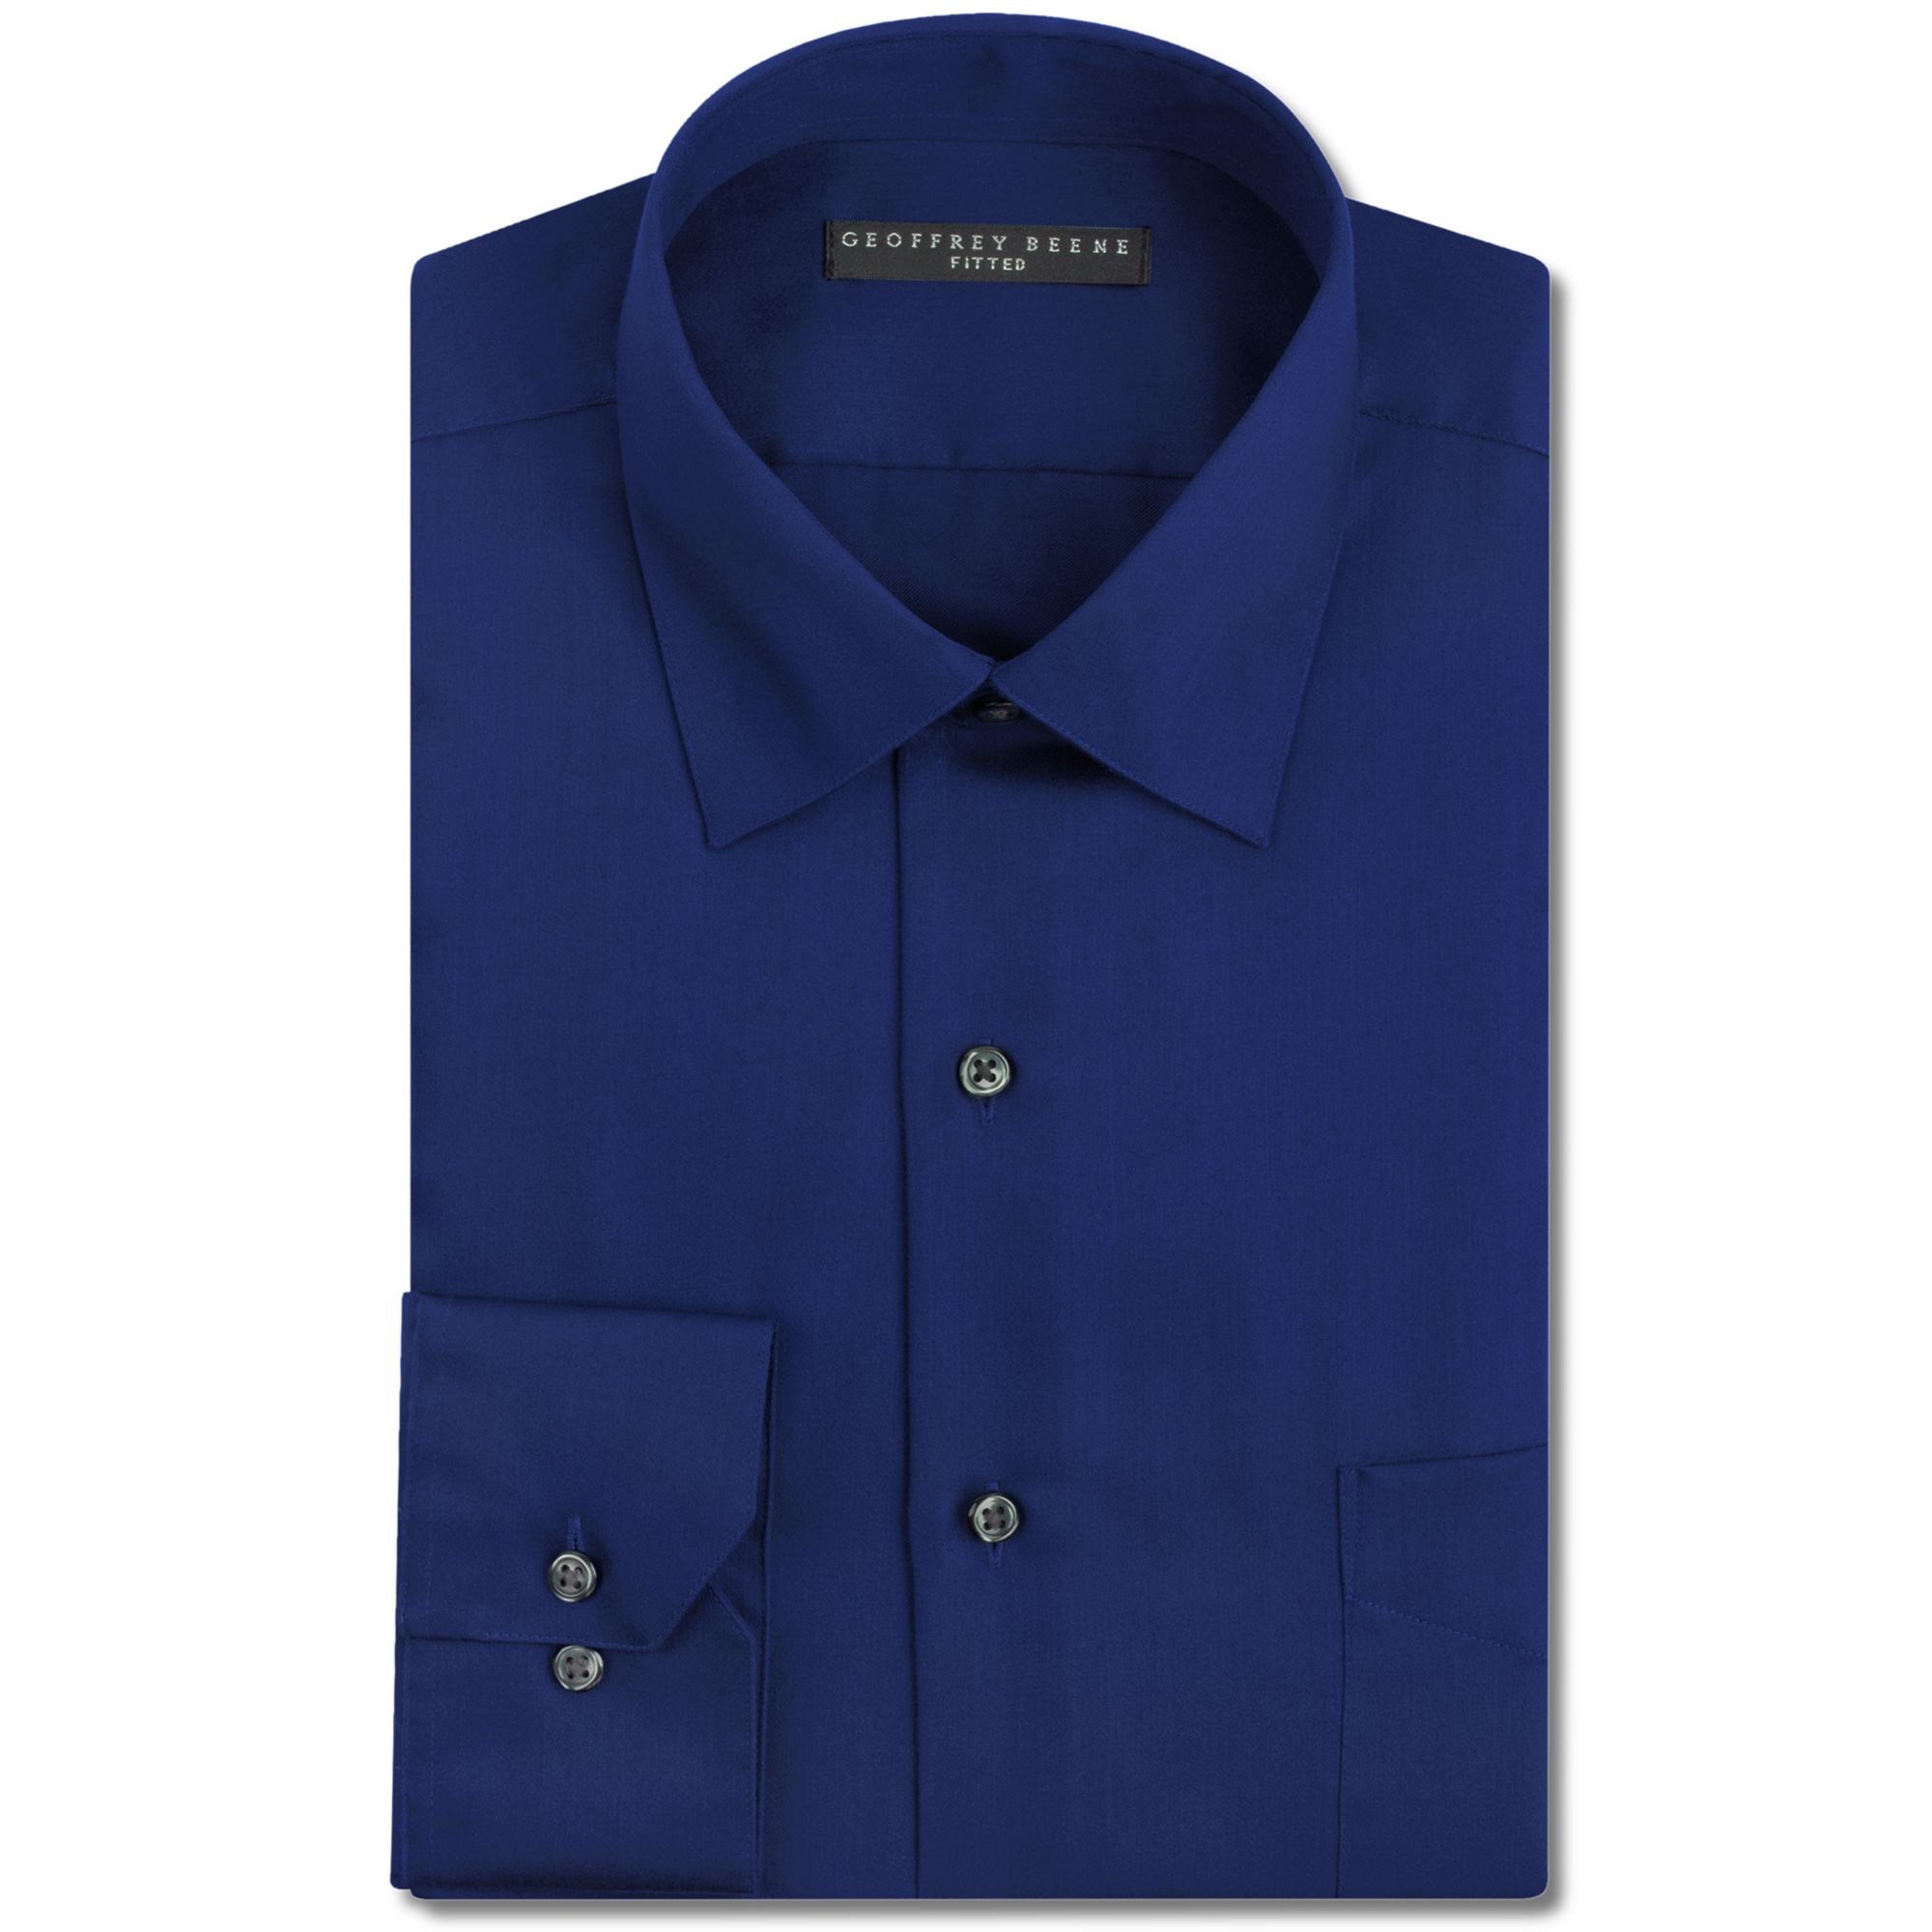 Lyst - Geoffrey beene Fitted Sateen Solid Dress Shirt in Blue for Men